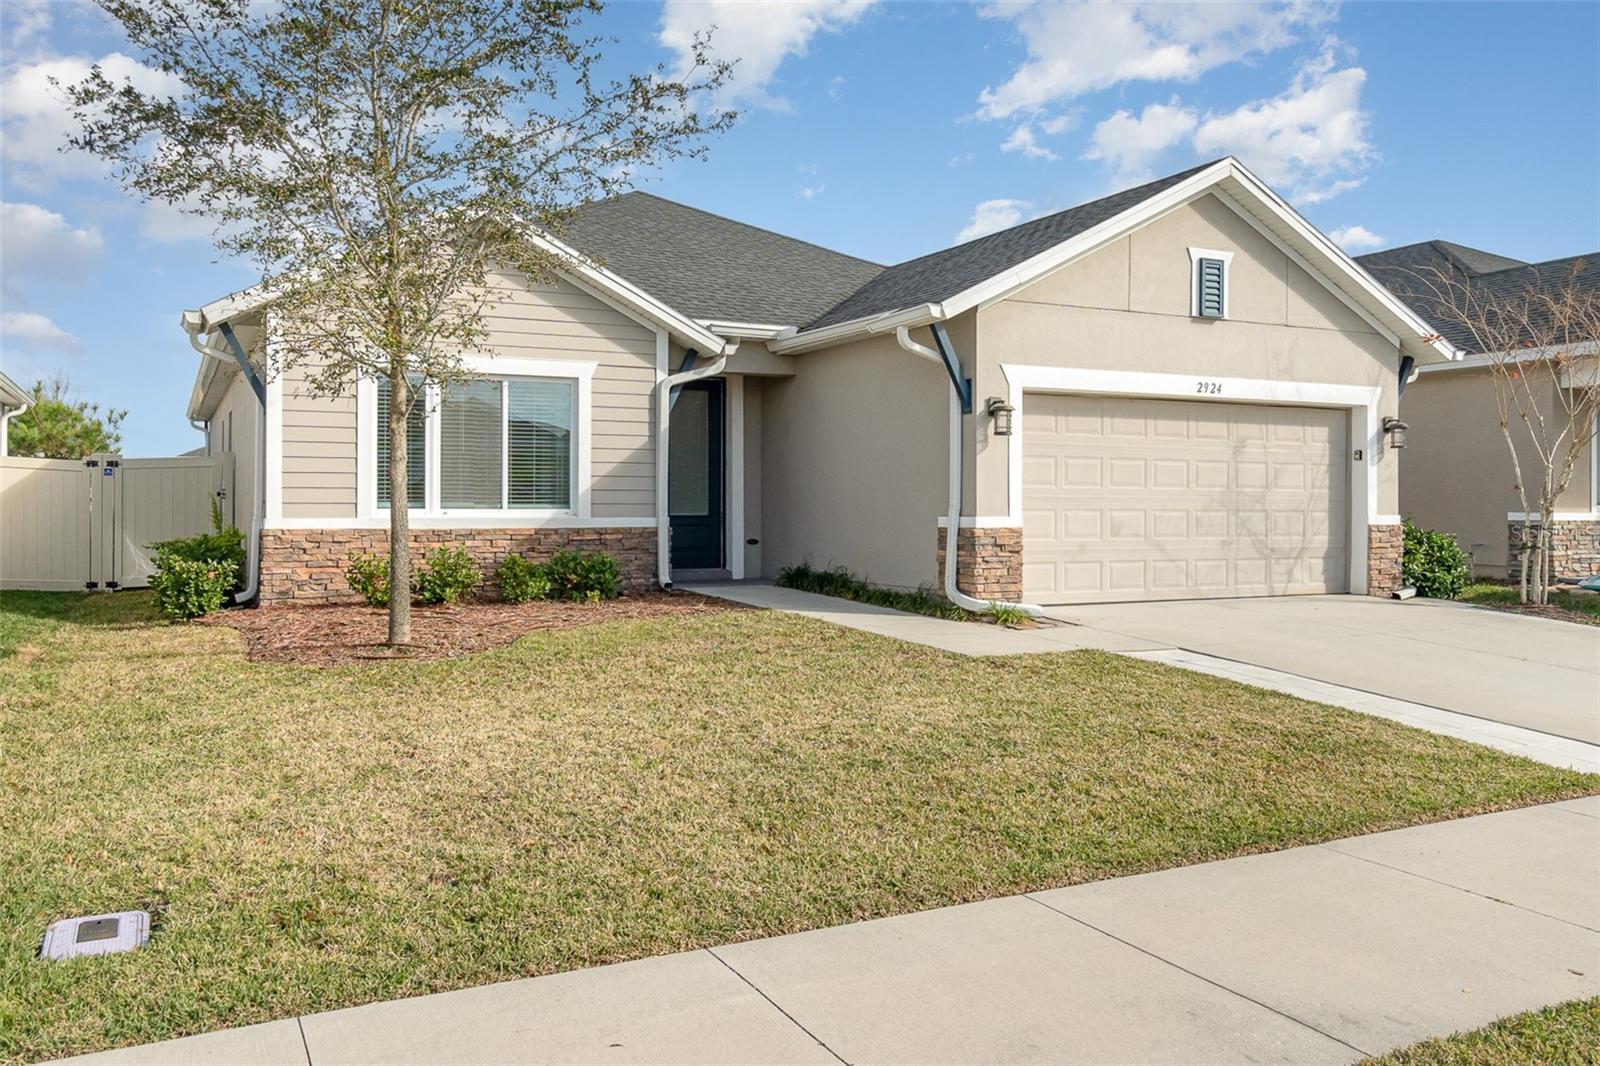 Photo one of 2924 Marlberry Ln Clermont FL 34714 | MLS O6181111